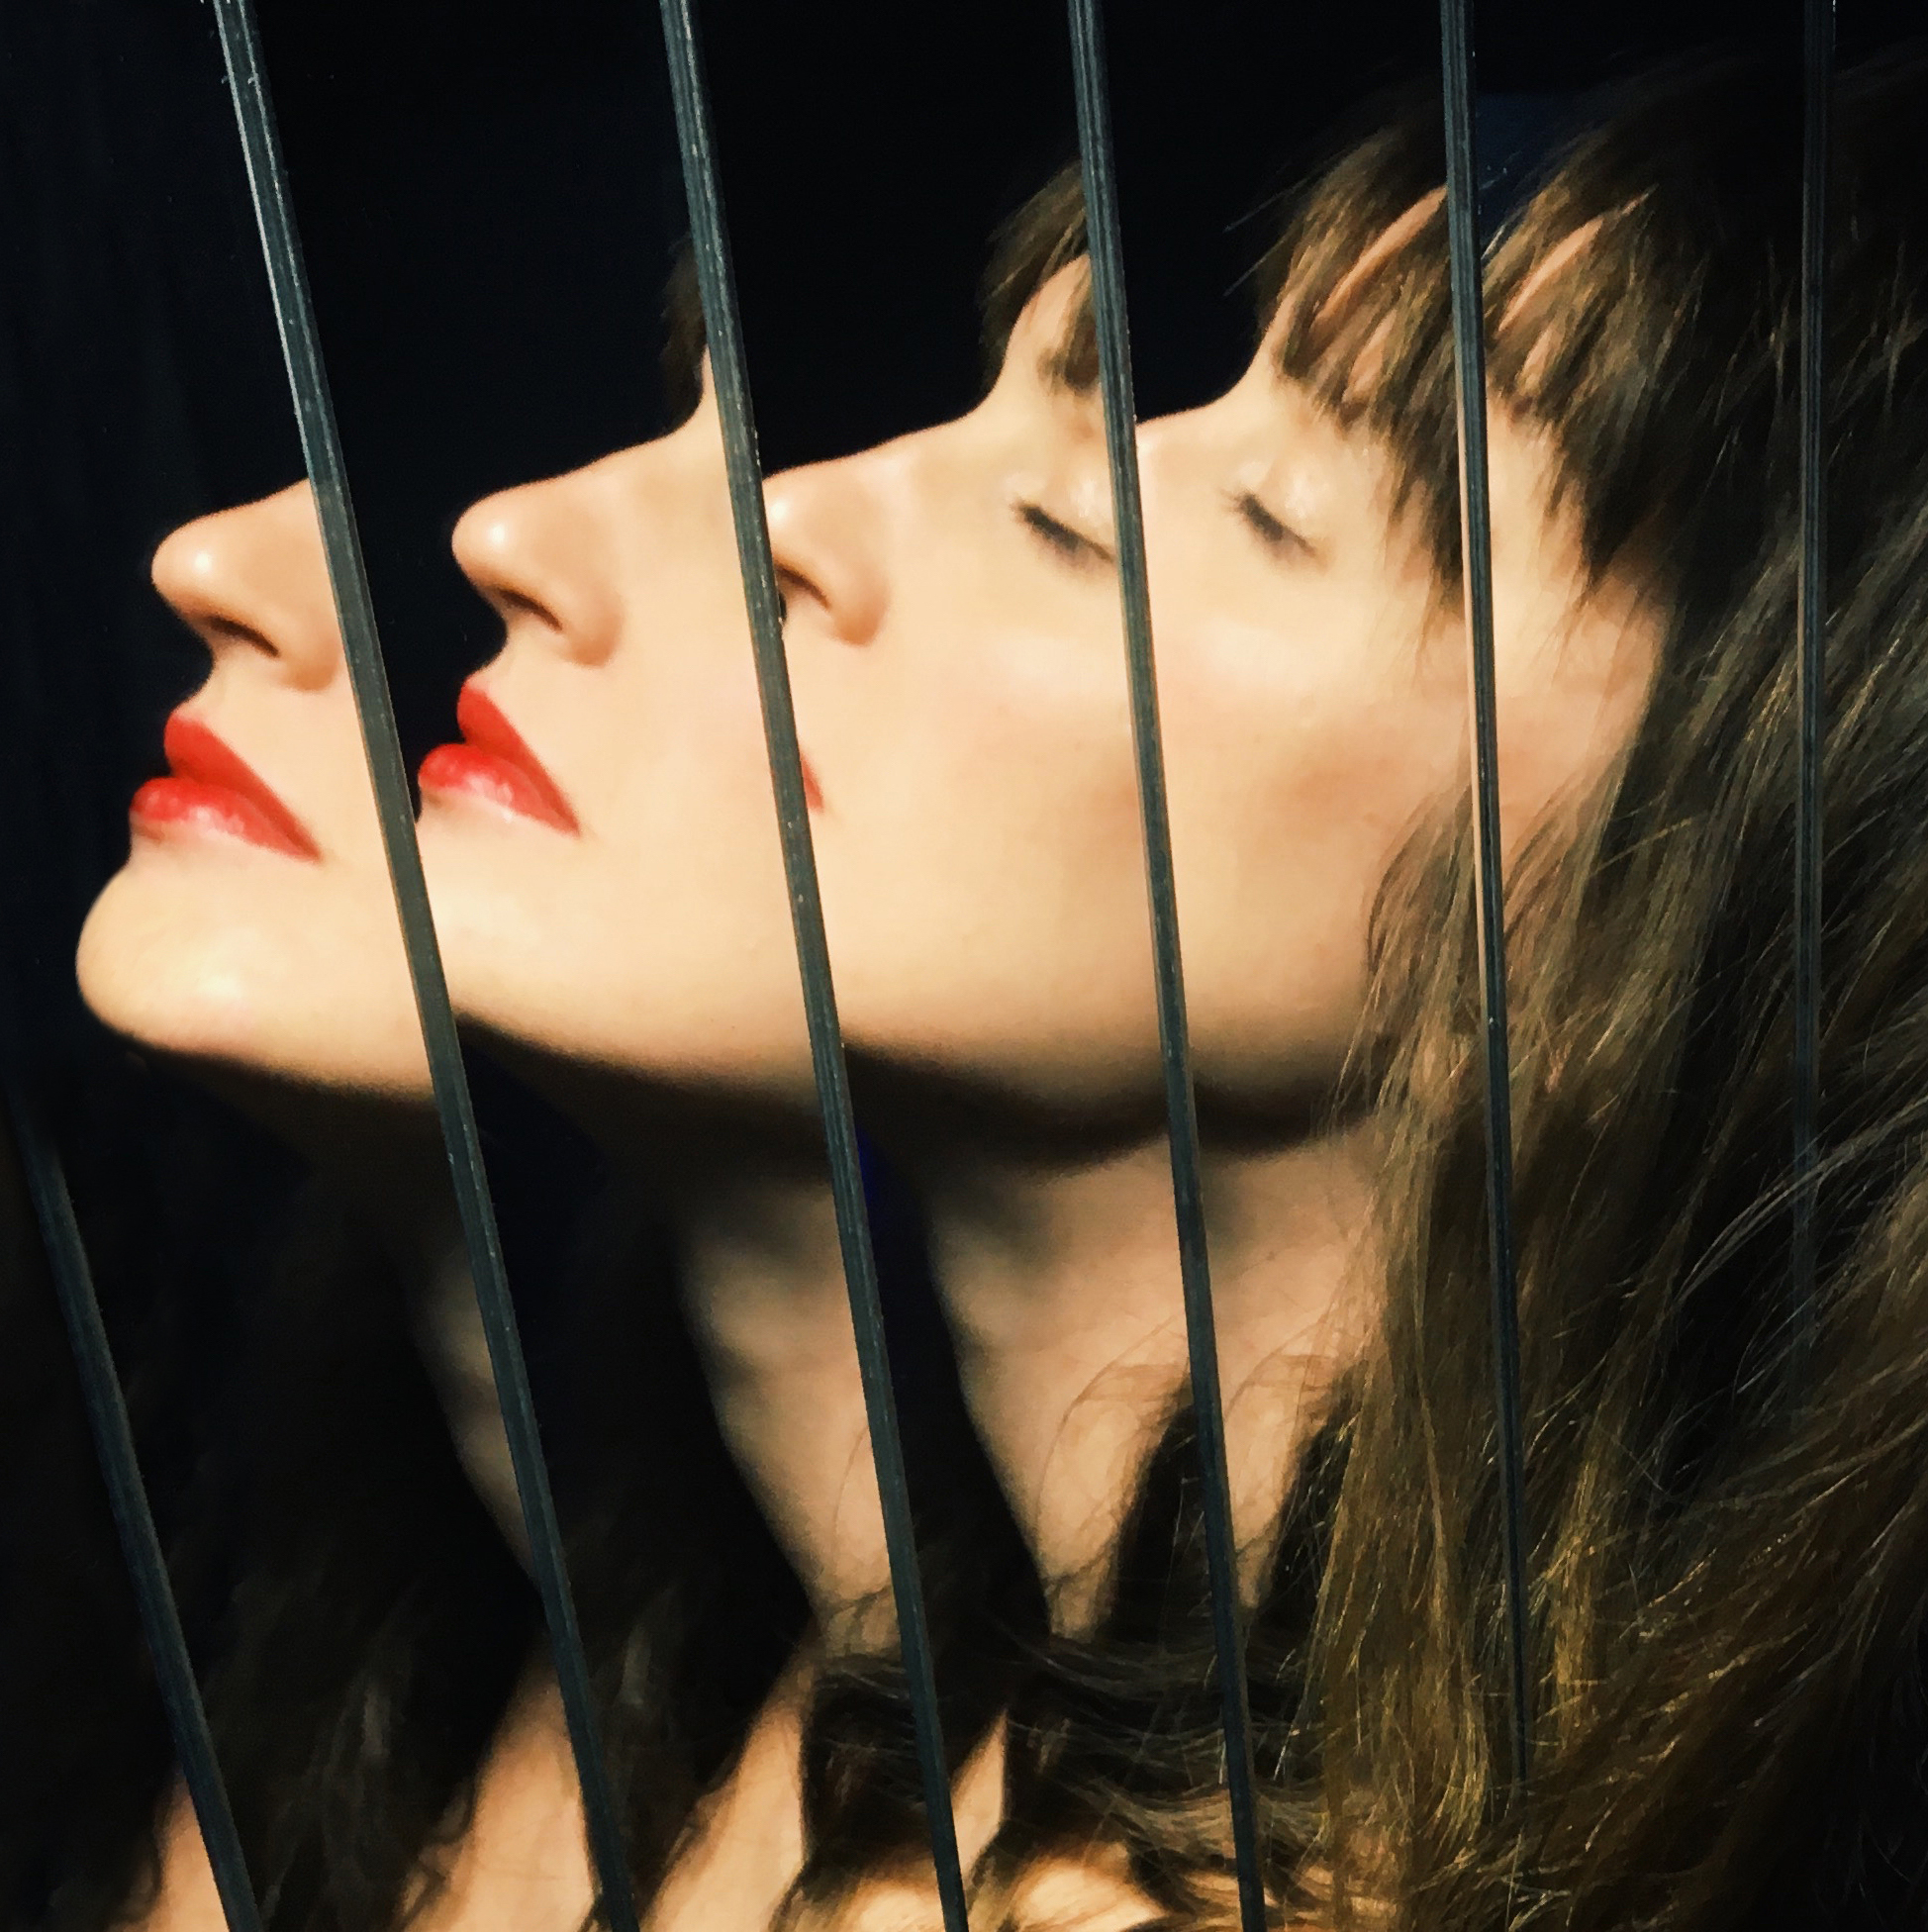 Annie Hart announces new album, tour & shares first single, “Stop Staring At You”